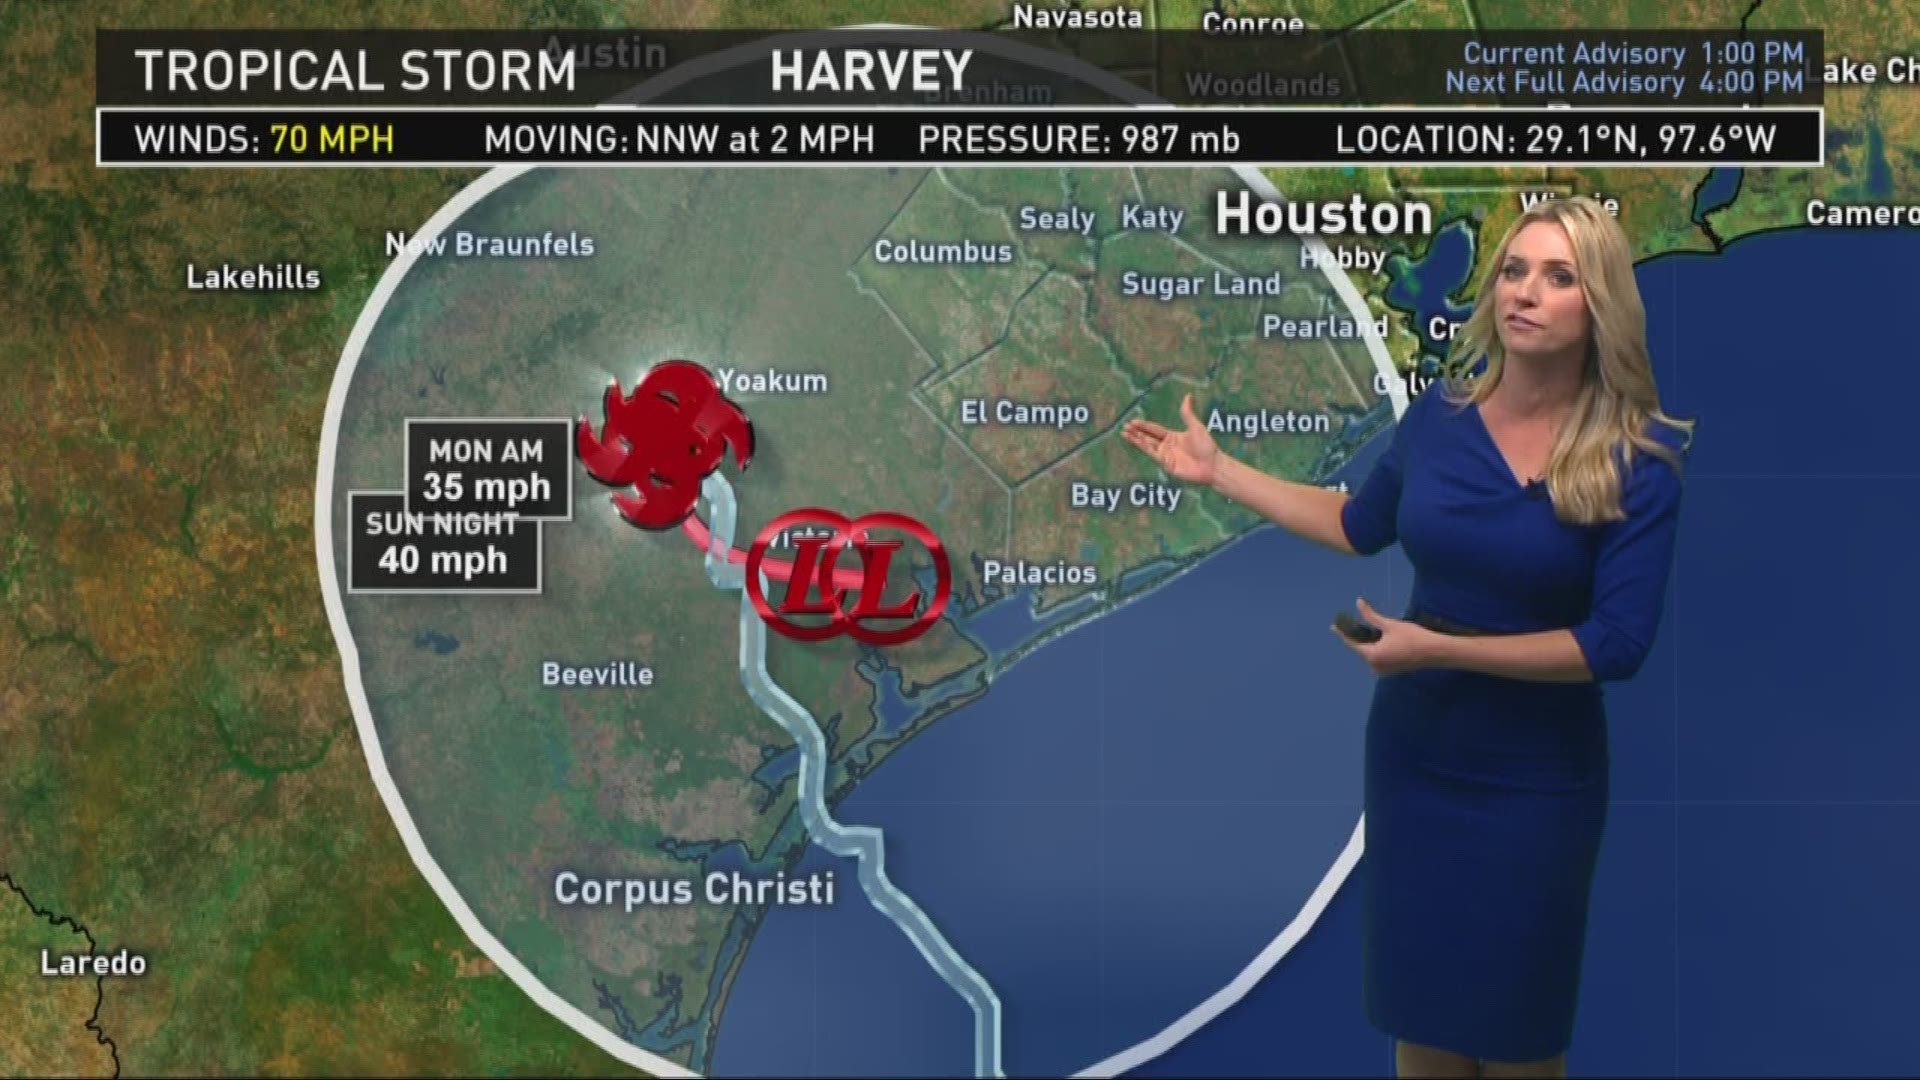 Harvey have now been downgraded to a tropical storm but flooding is still a major threat.